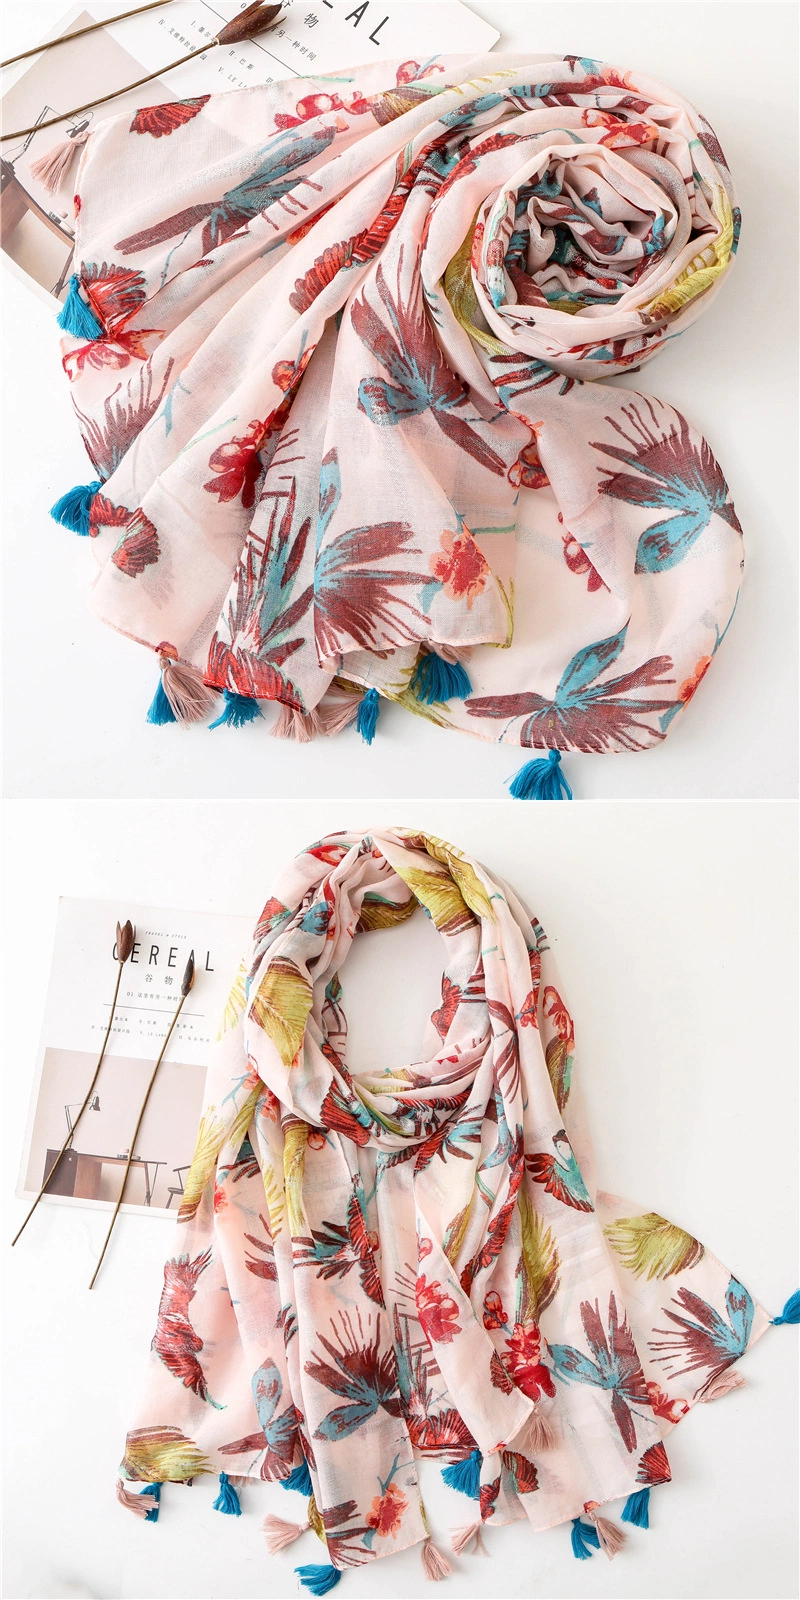 Women&prime;s Head Wrap Beach Shawl Flowers Printing Floral Smooth Soft Hand Feeling Pink Lady&prime;s Spring Summer Fashion Scarf for Girl with Silver Lurex Tassel